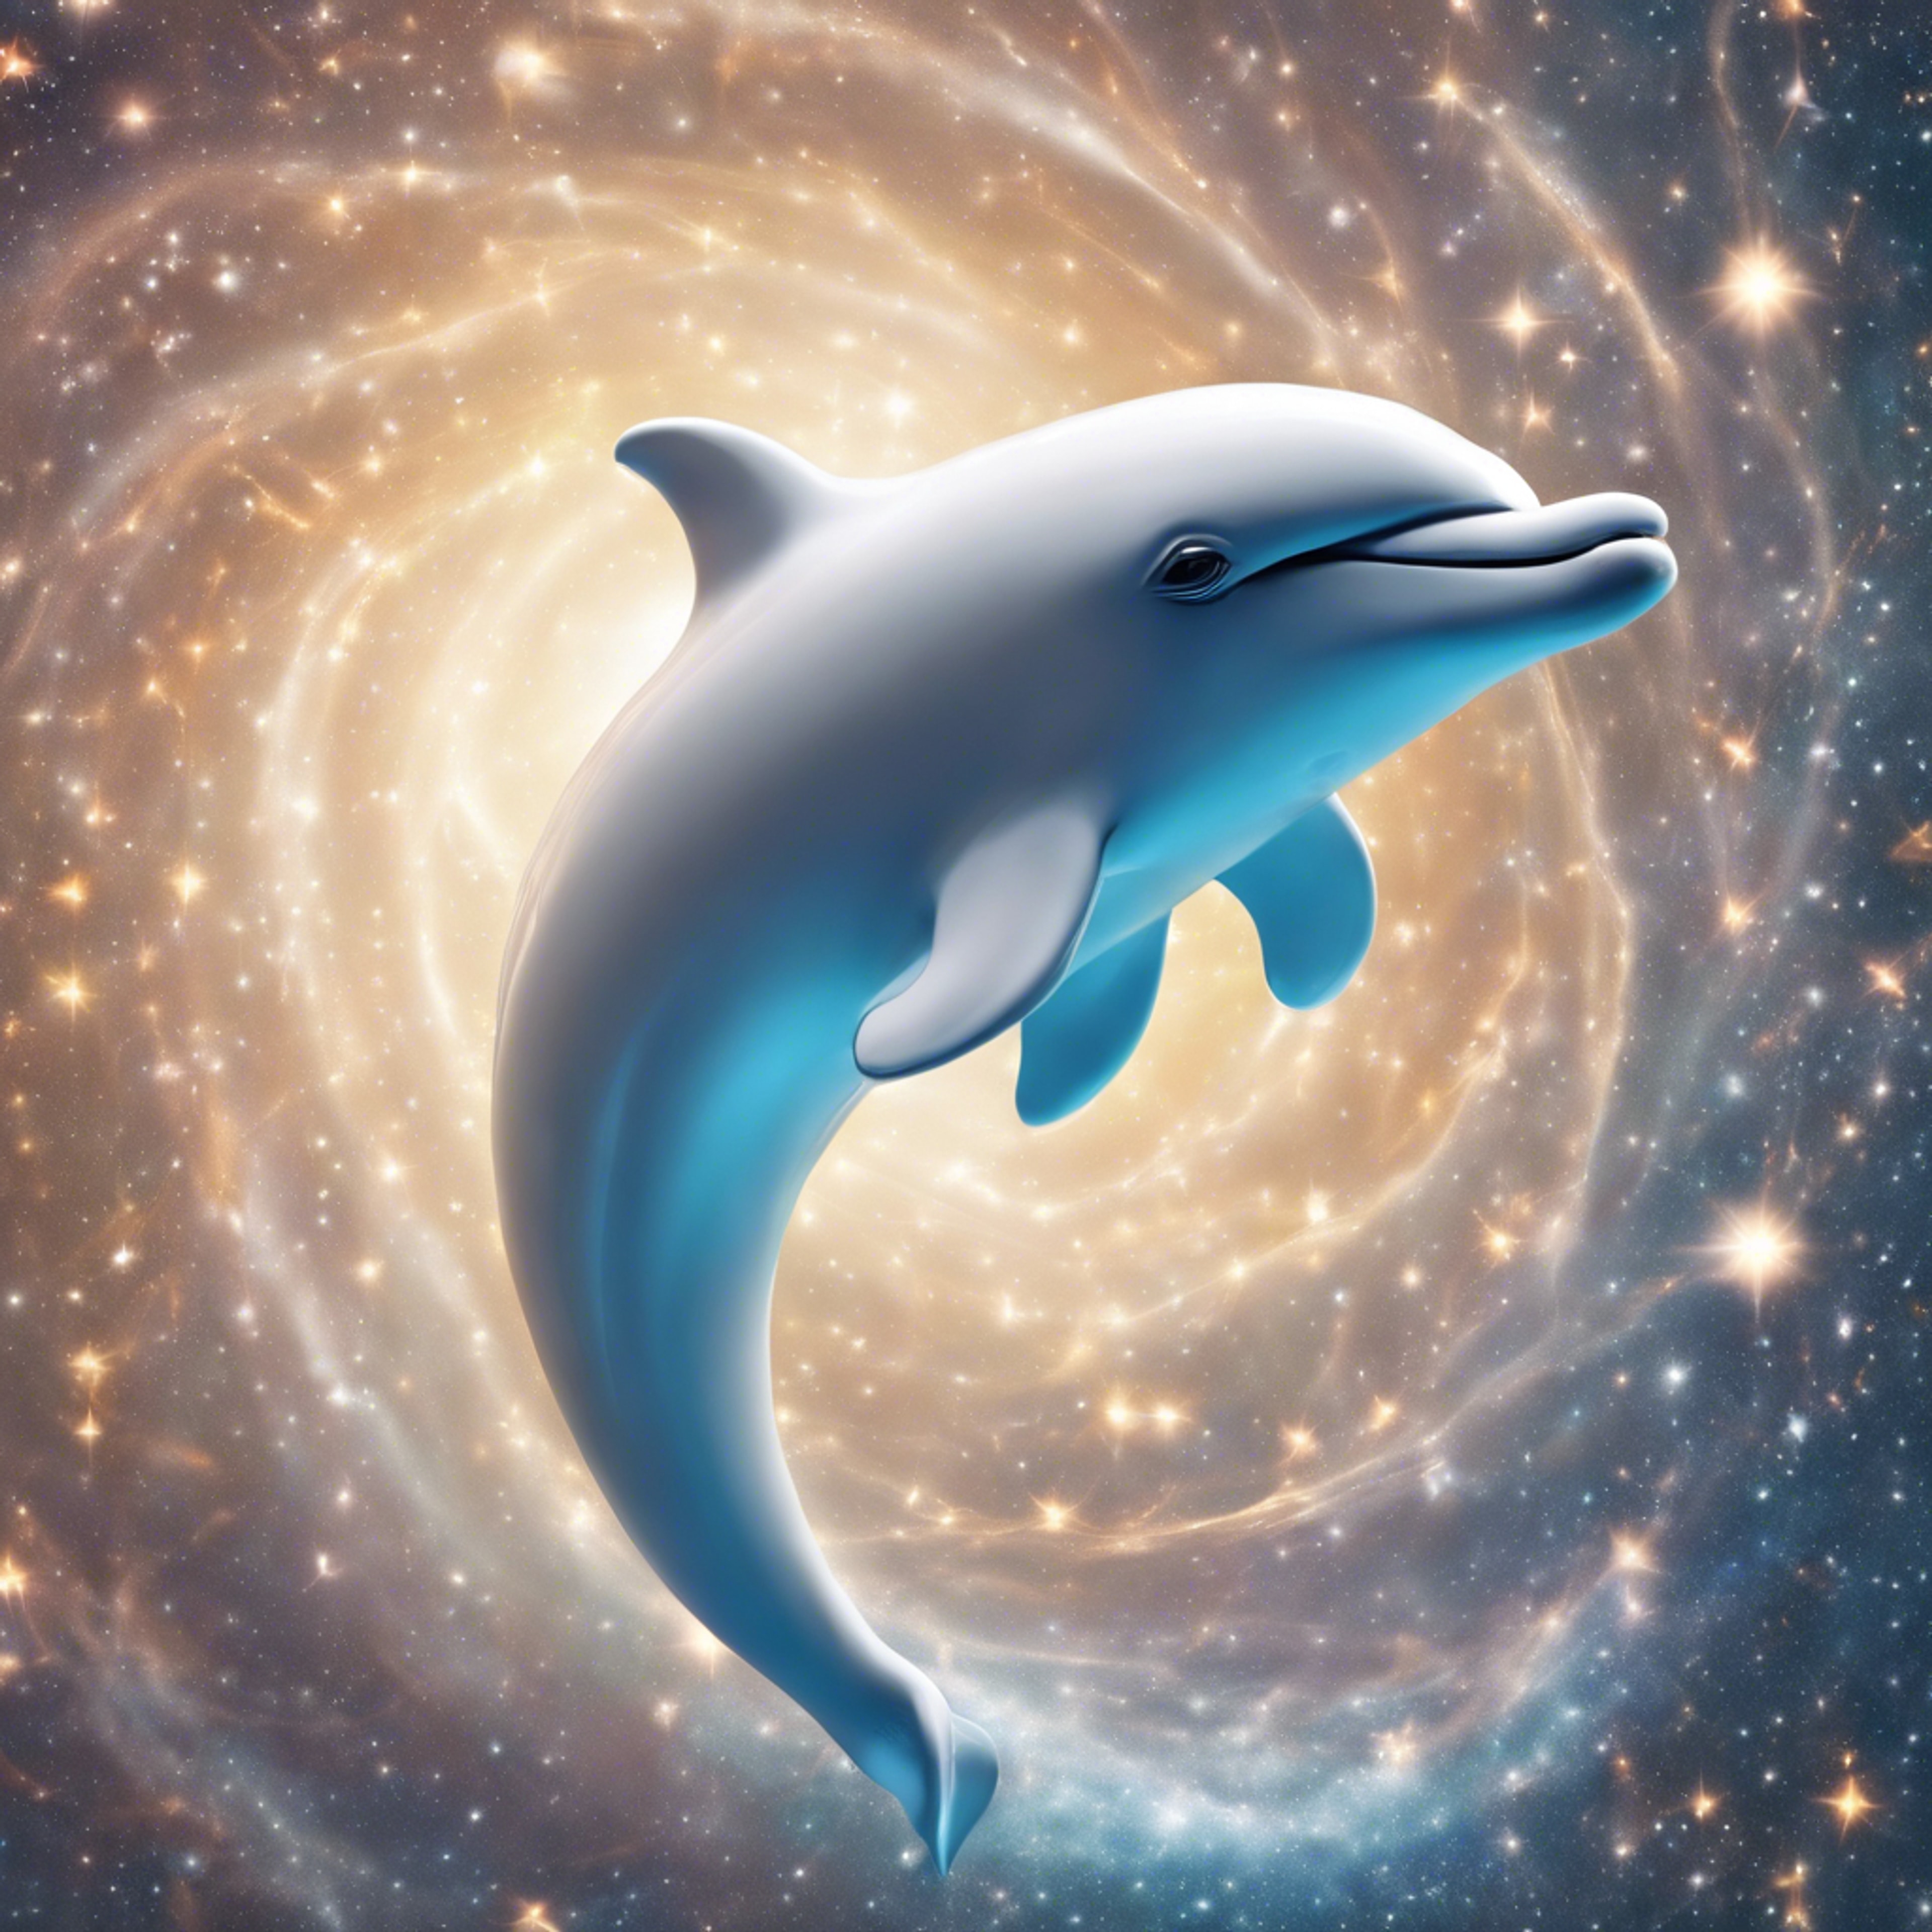 An artist's dreamy portrayal of a porcelain-white dolphin emerging from a swirl of stars in the endless cosmos. Sfondo[07abc05d40734834903a]